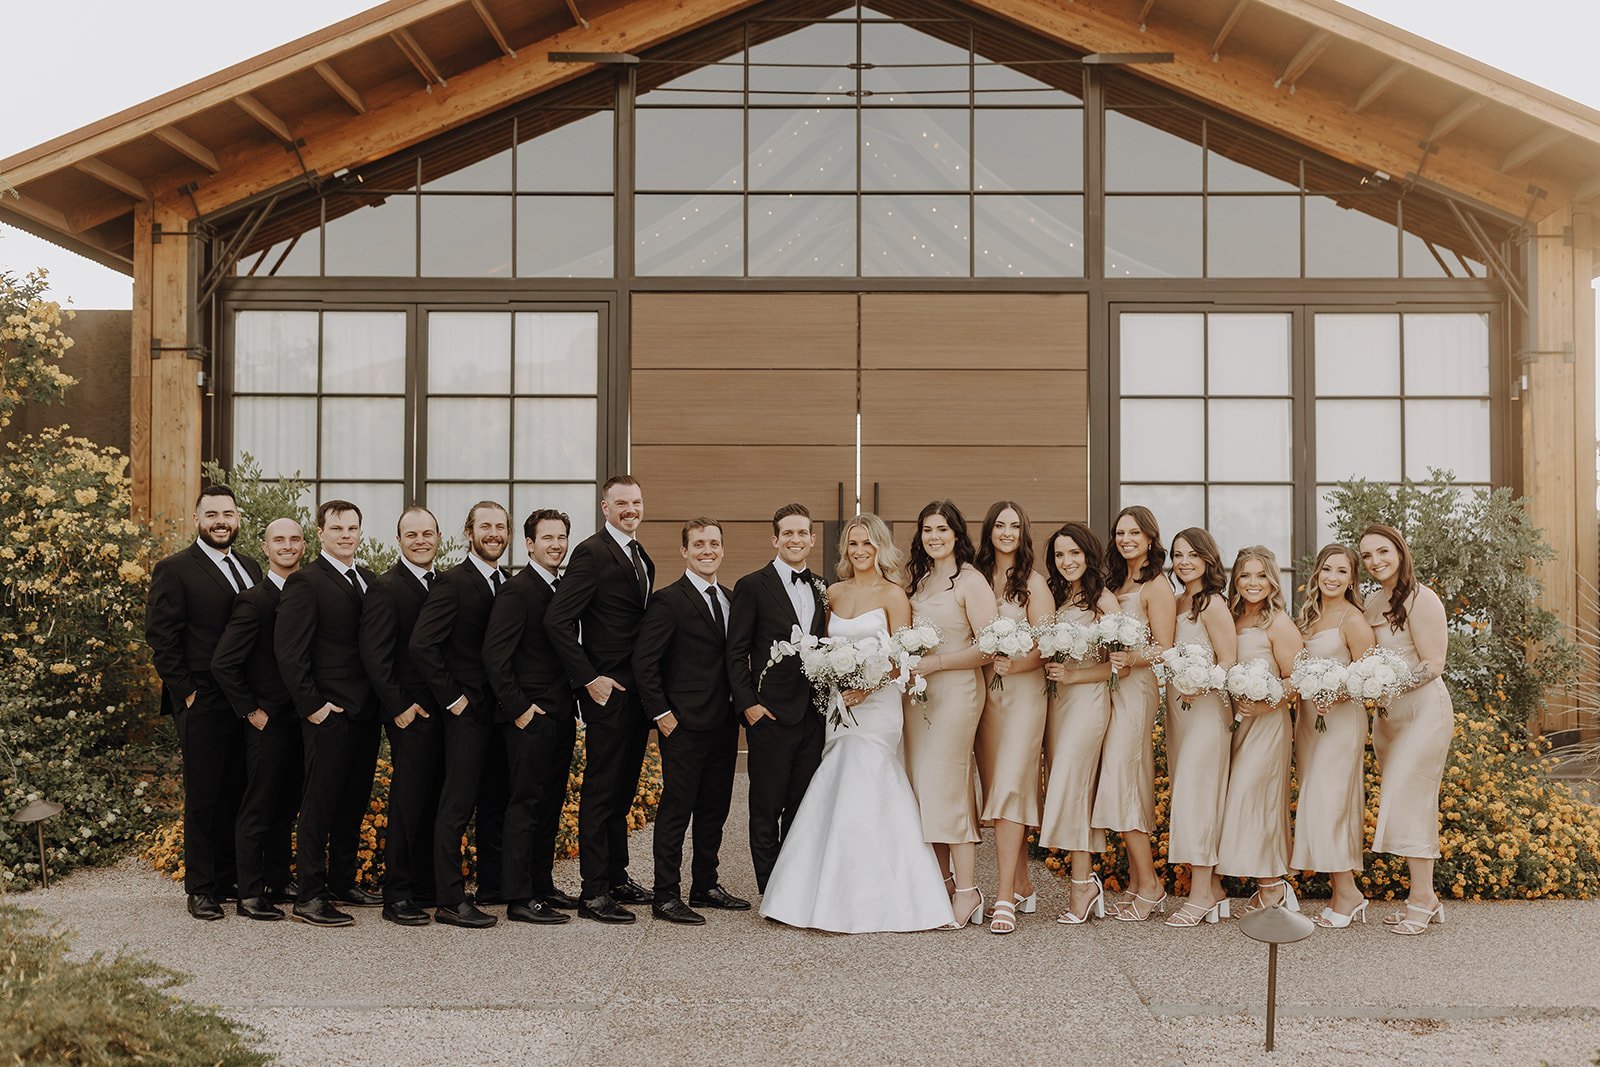 Wedding party in black suits and champagne colored dresses